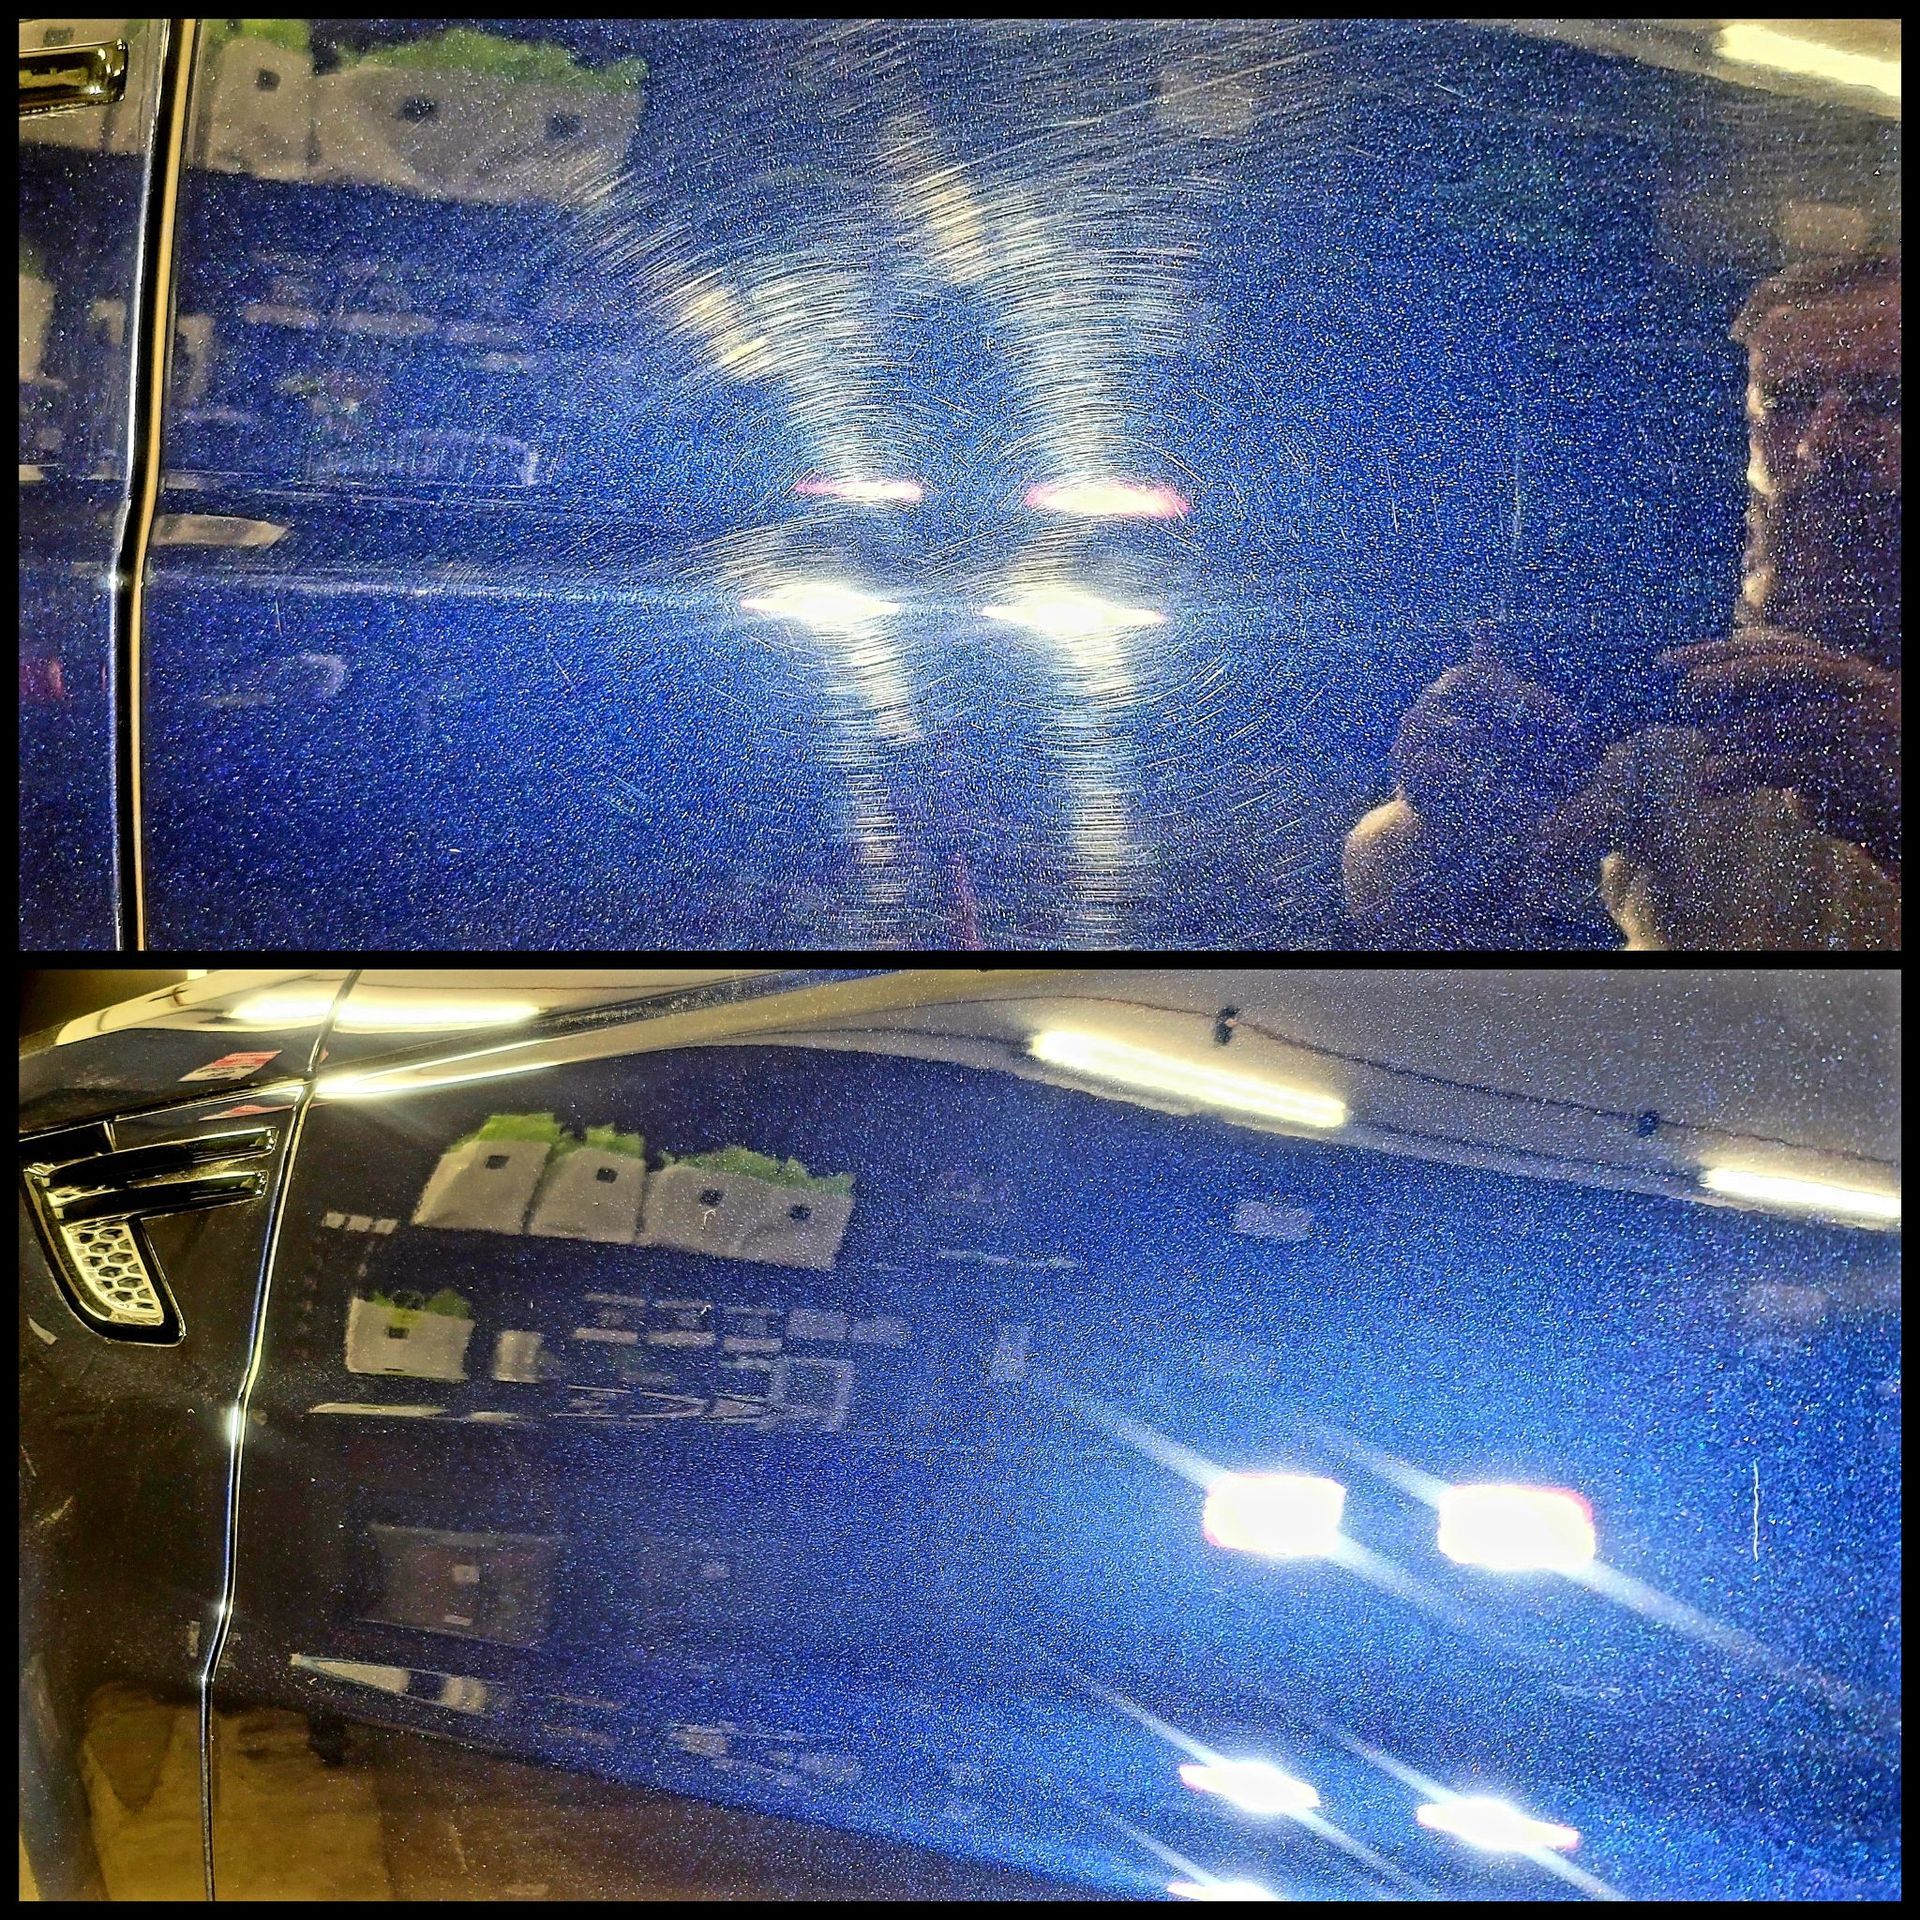 before and after paint correction